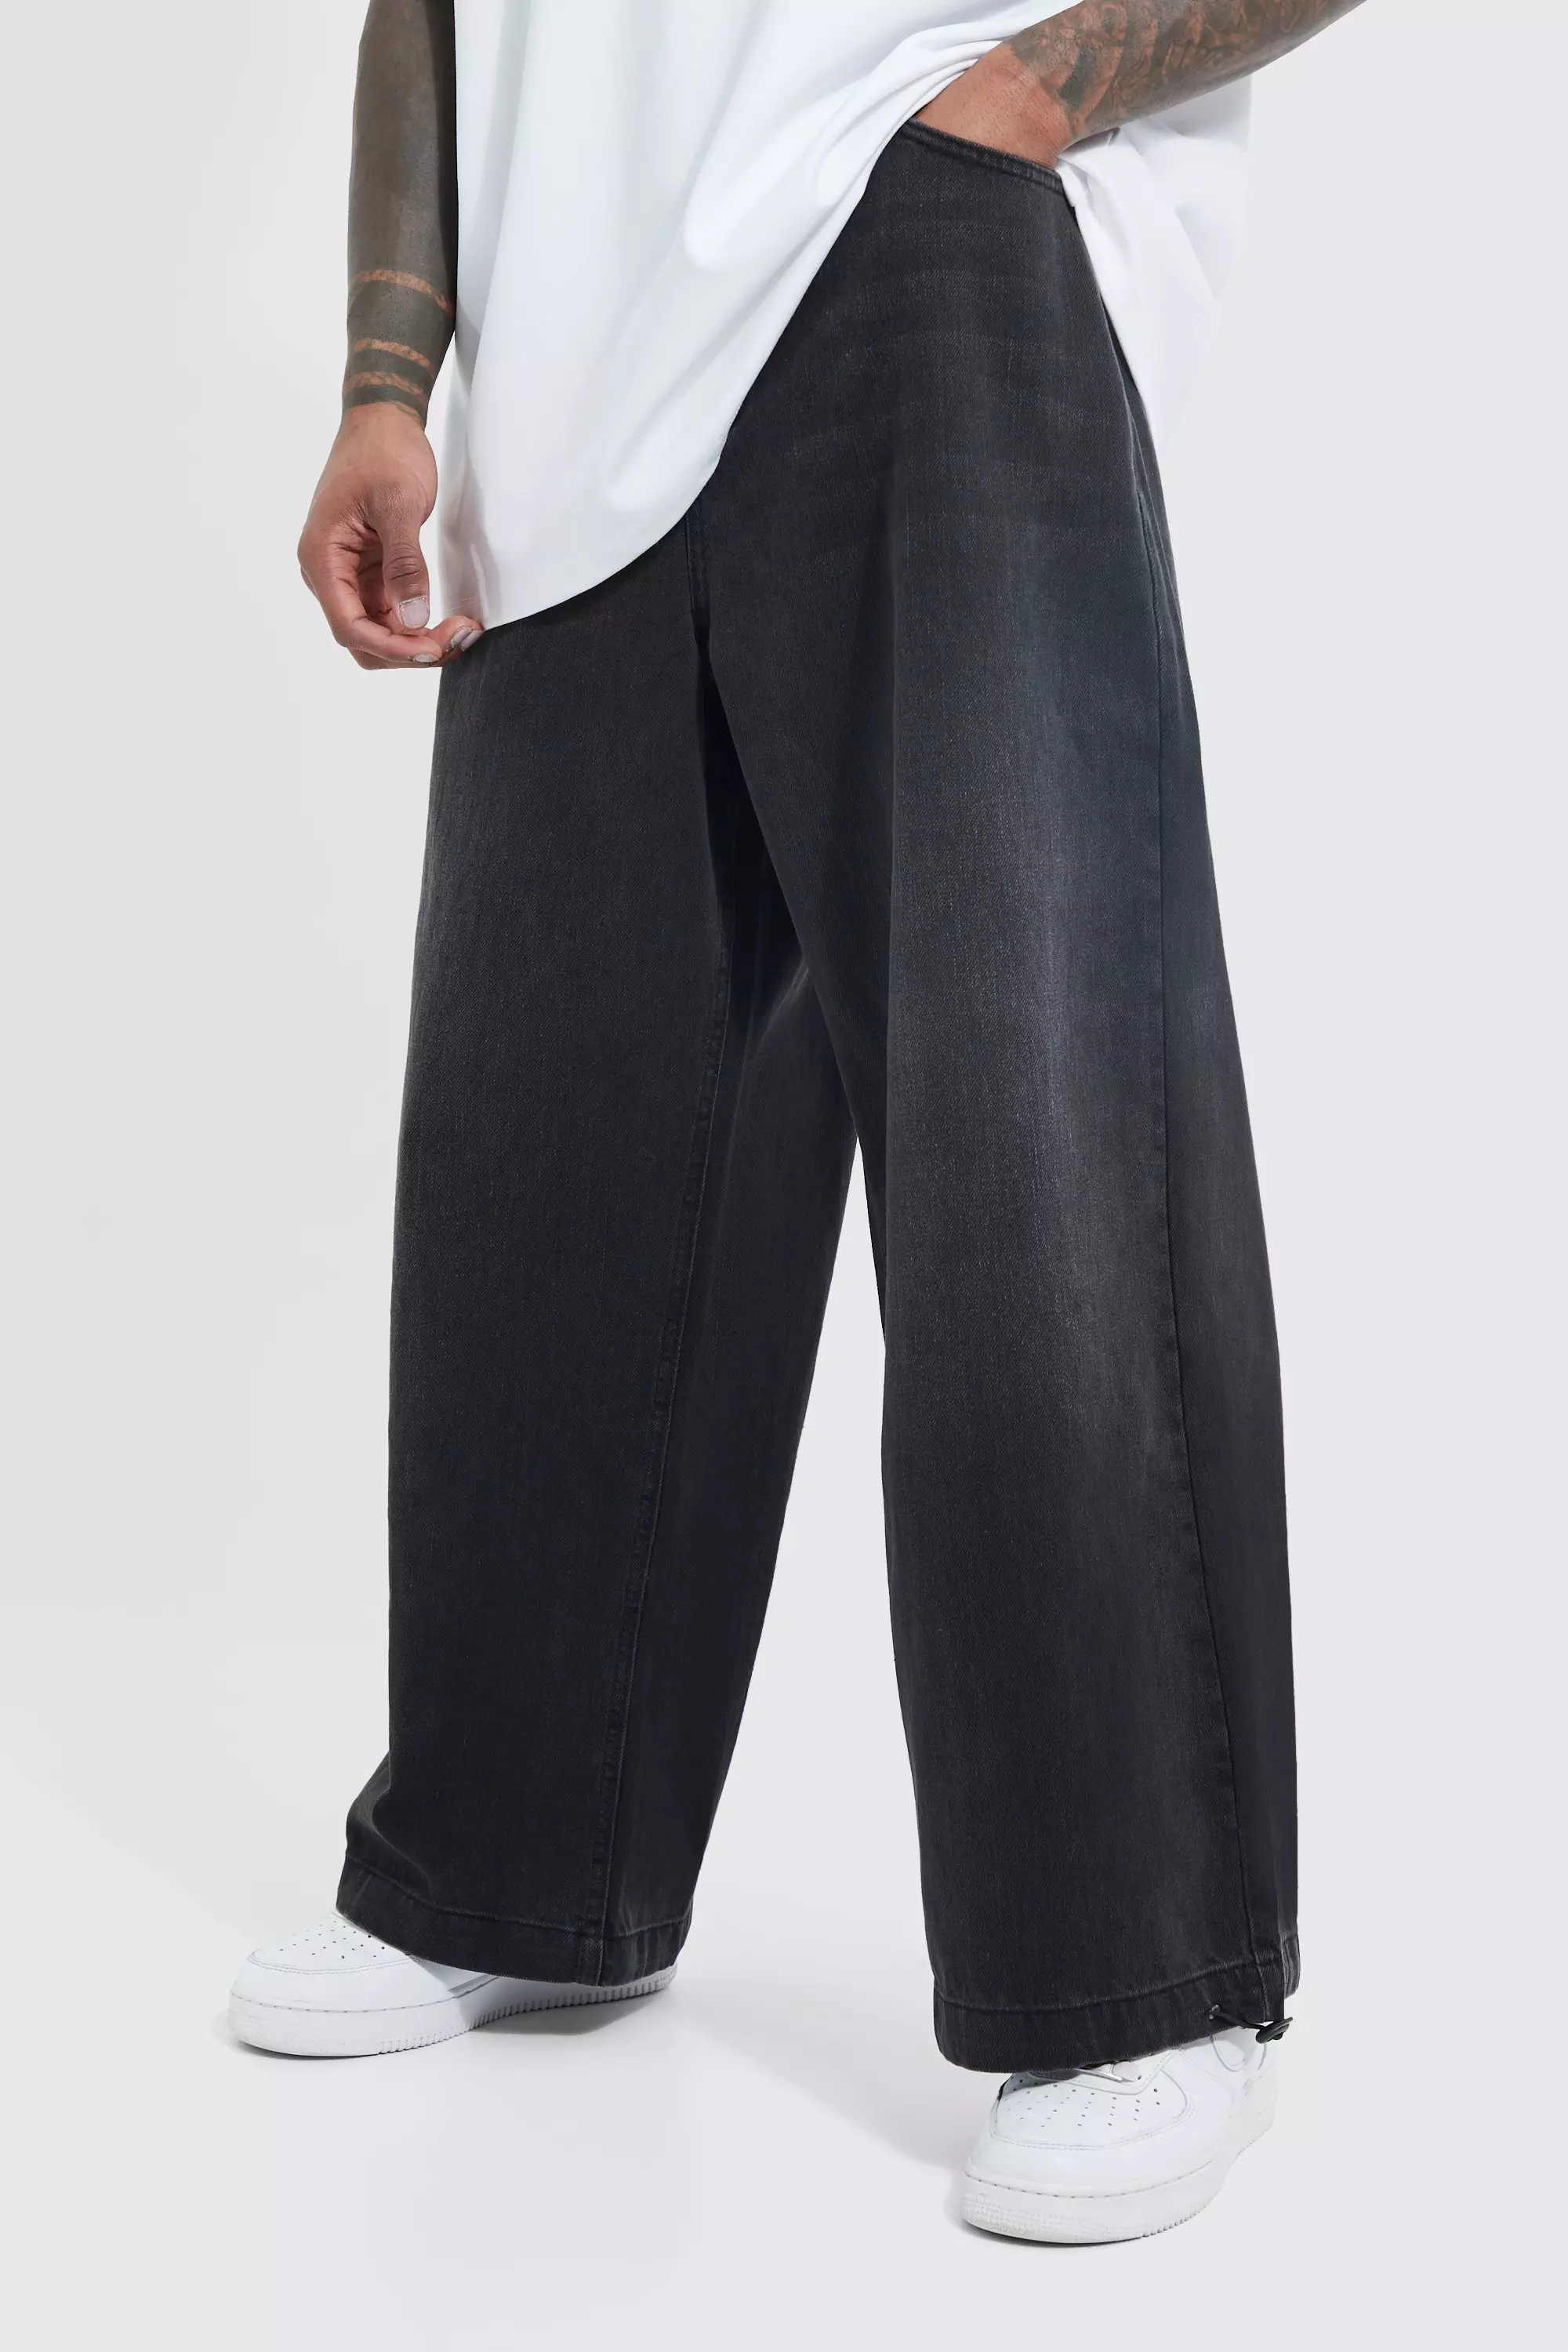 Express  Super High Waisted Black Baggy Wide Leg Jeans in Pitch